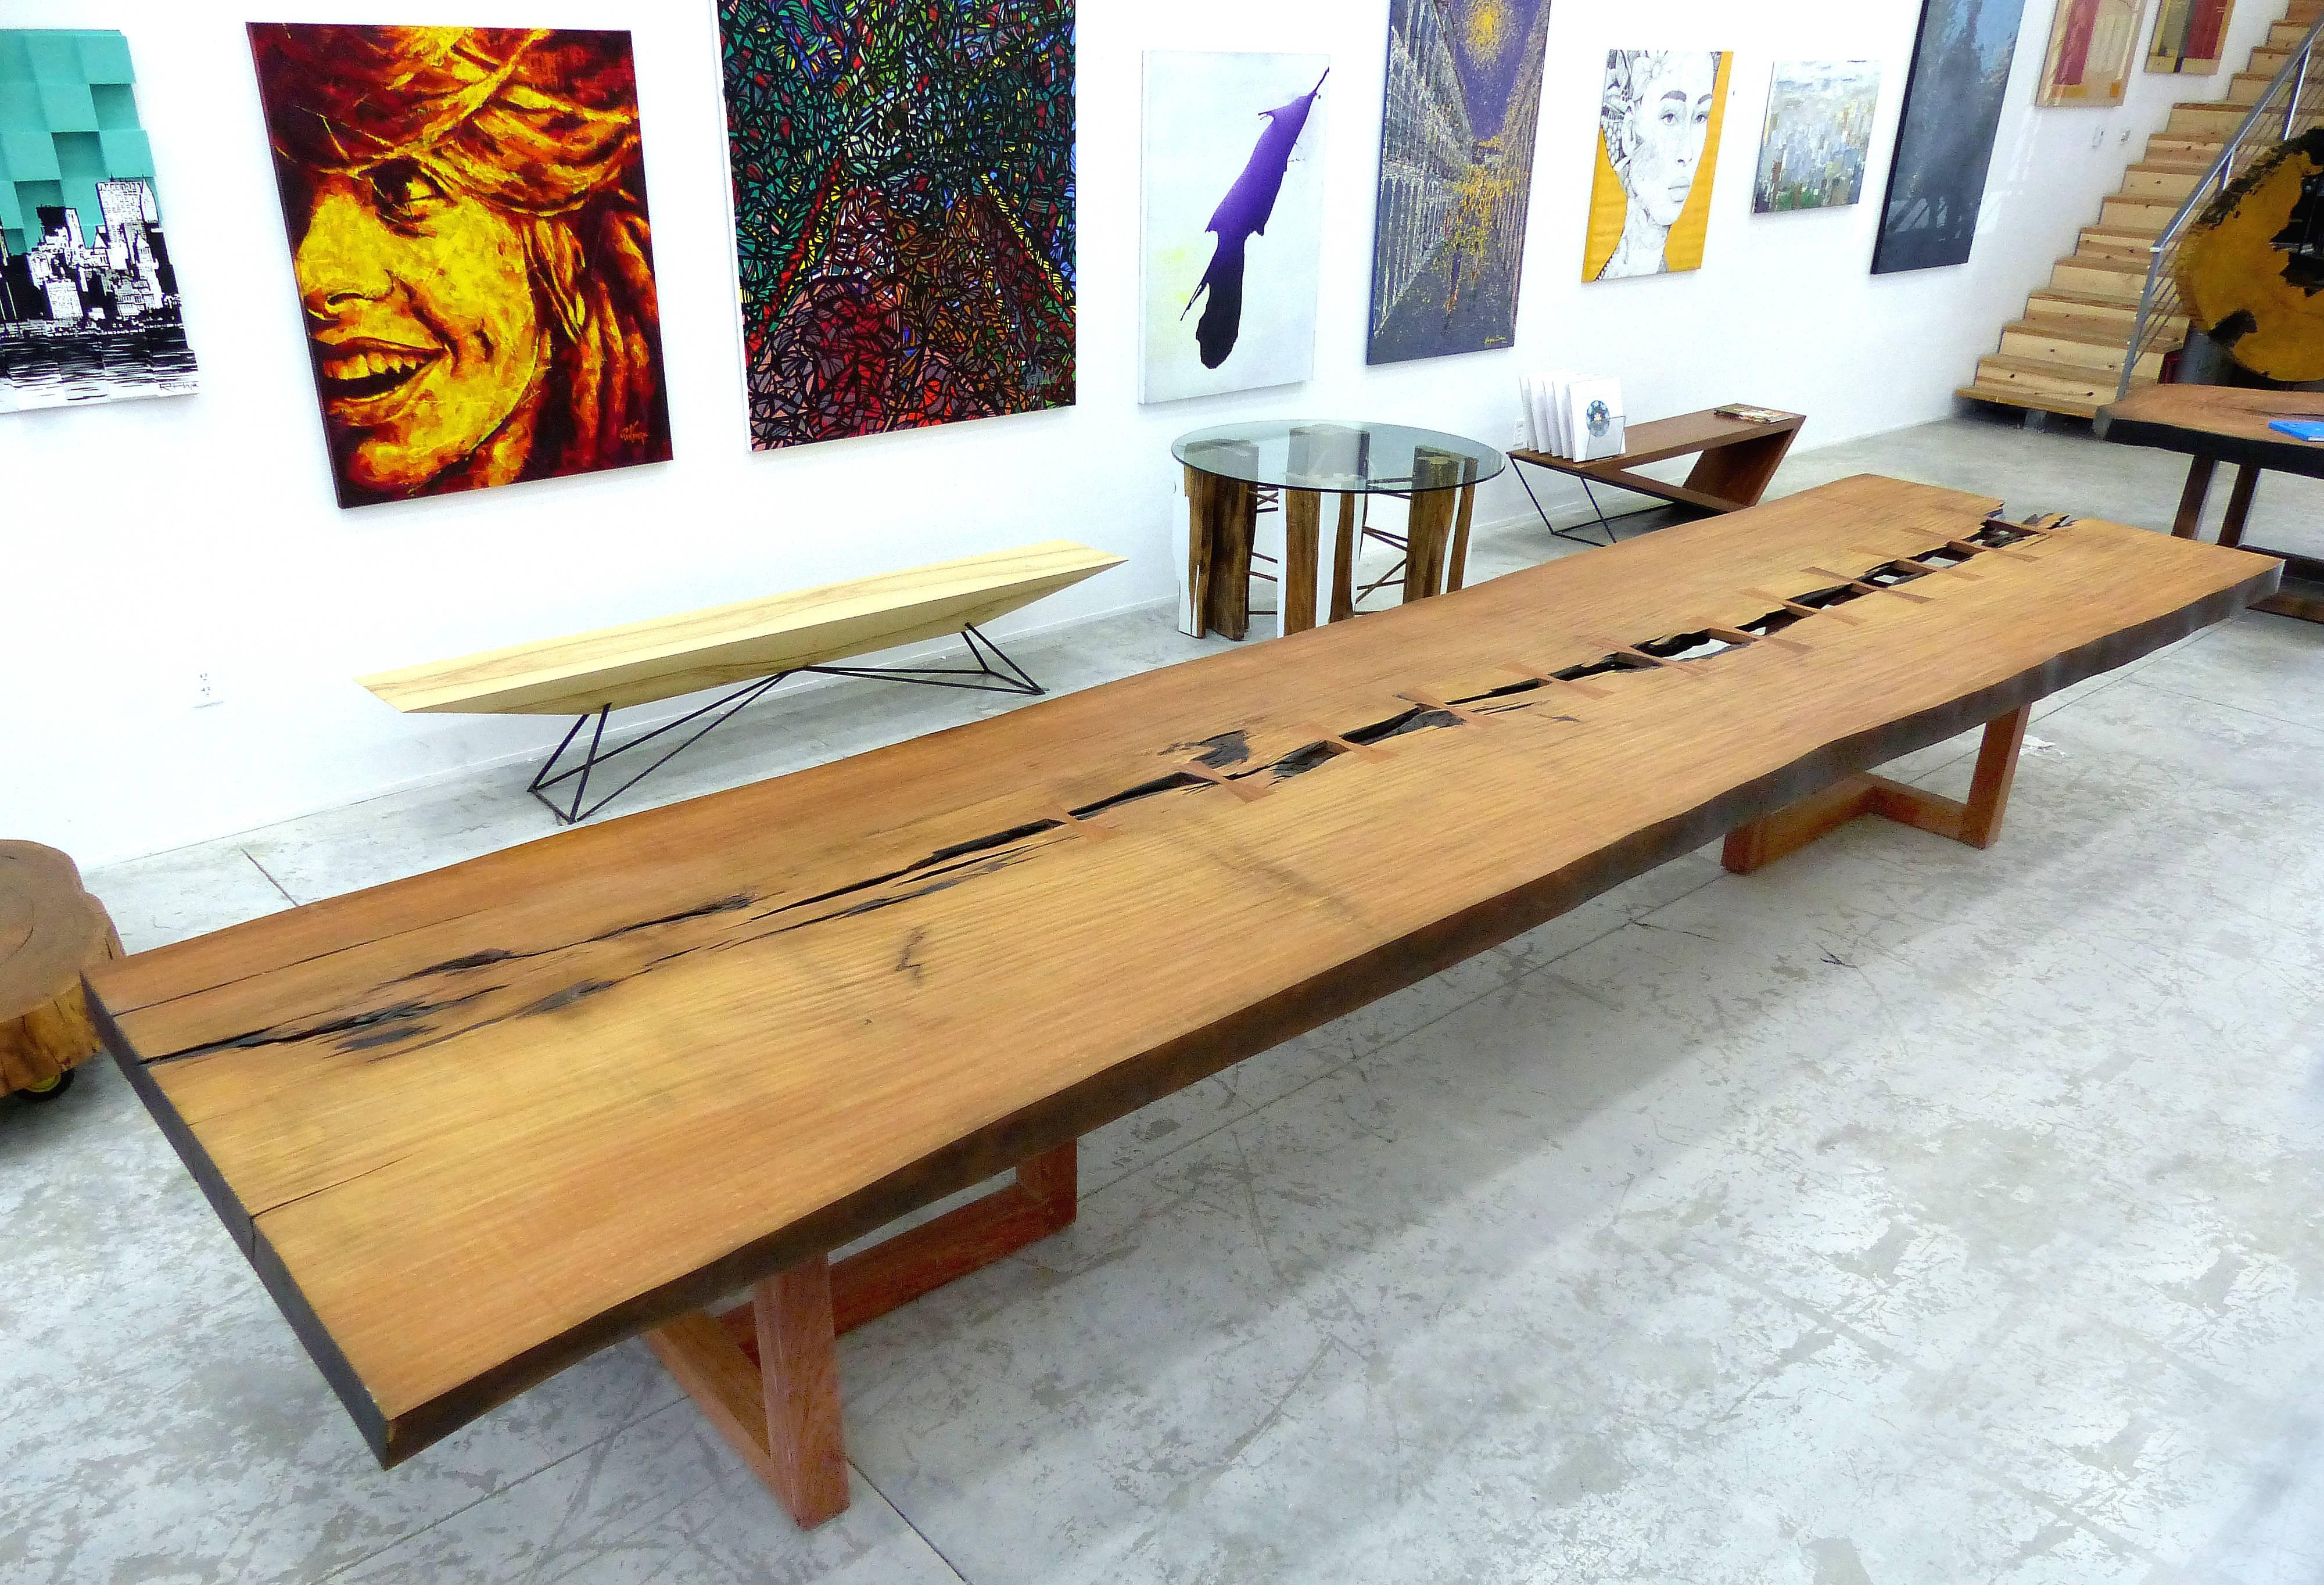 Monumental Brazilian Amazon Garapa Wood Table by Artist Valeria Totti

Offered is a large and monumental garapa wood table designed by Brazilian artist Valeria Totti in conjunction with the Brazilian government in a joined effort of reforestation of